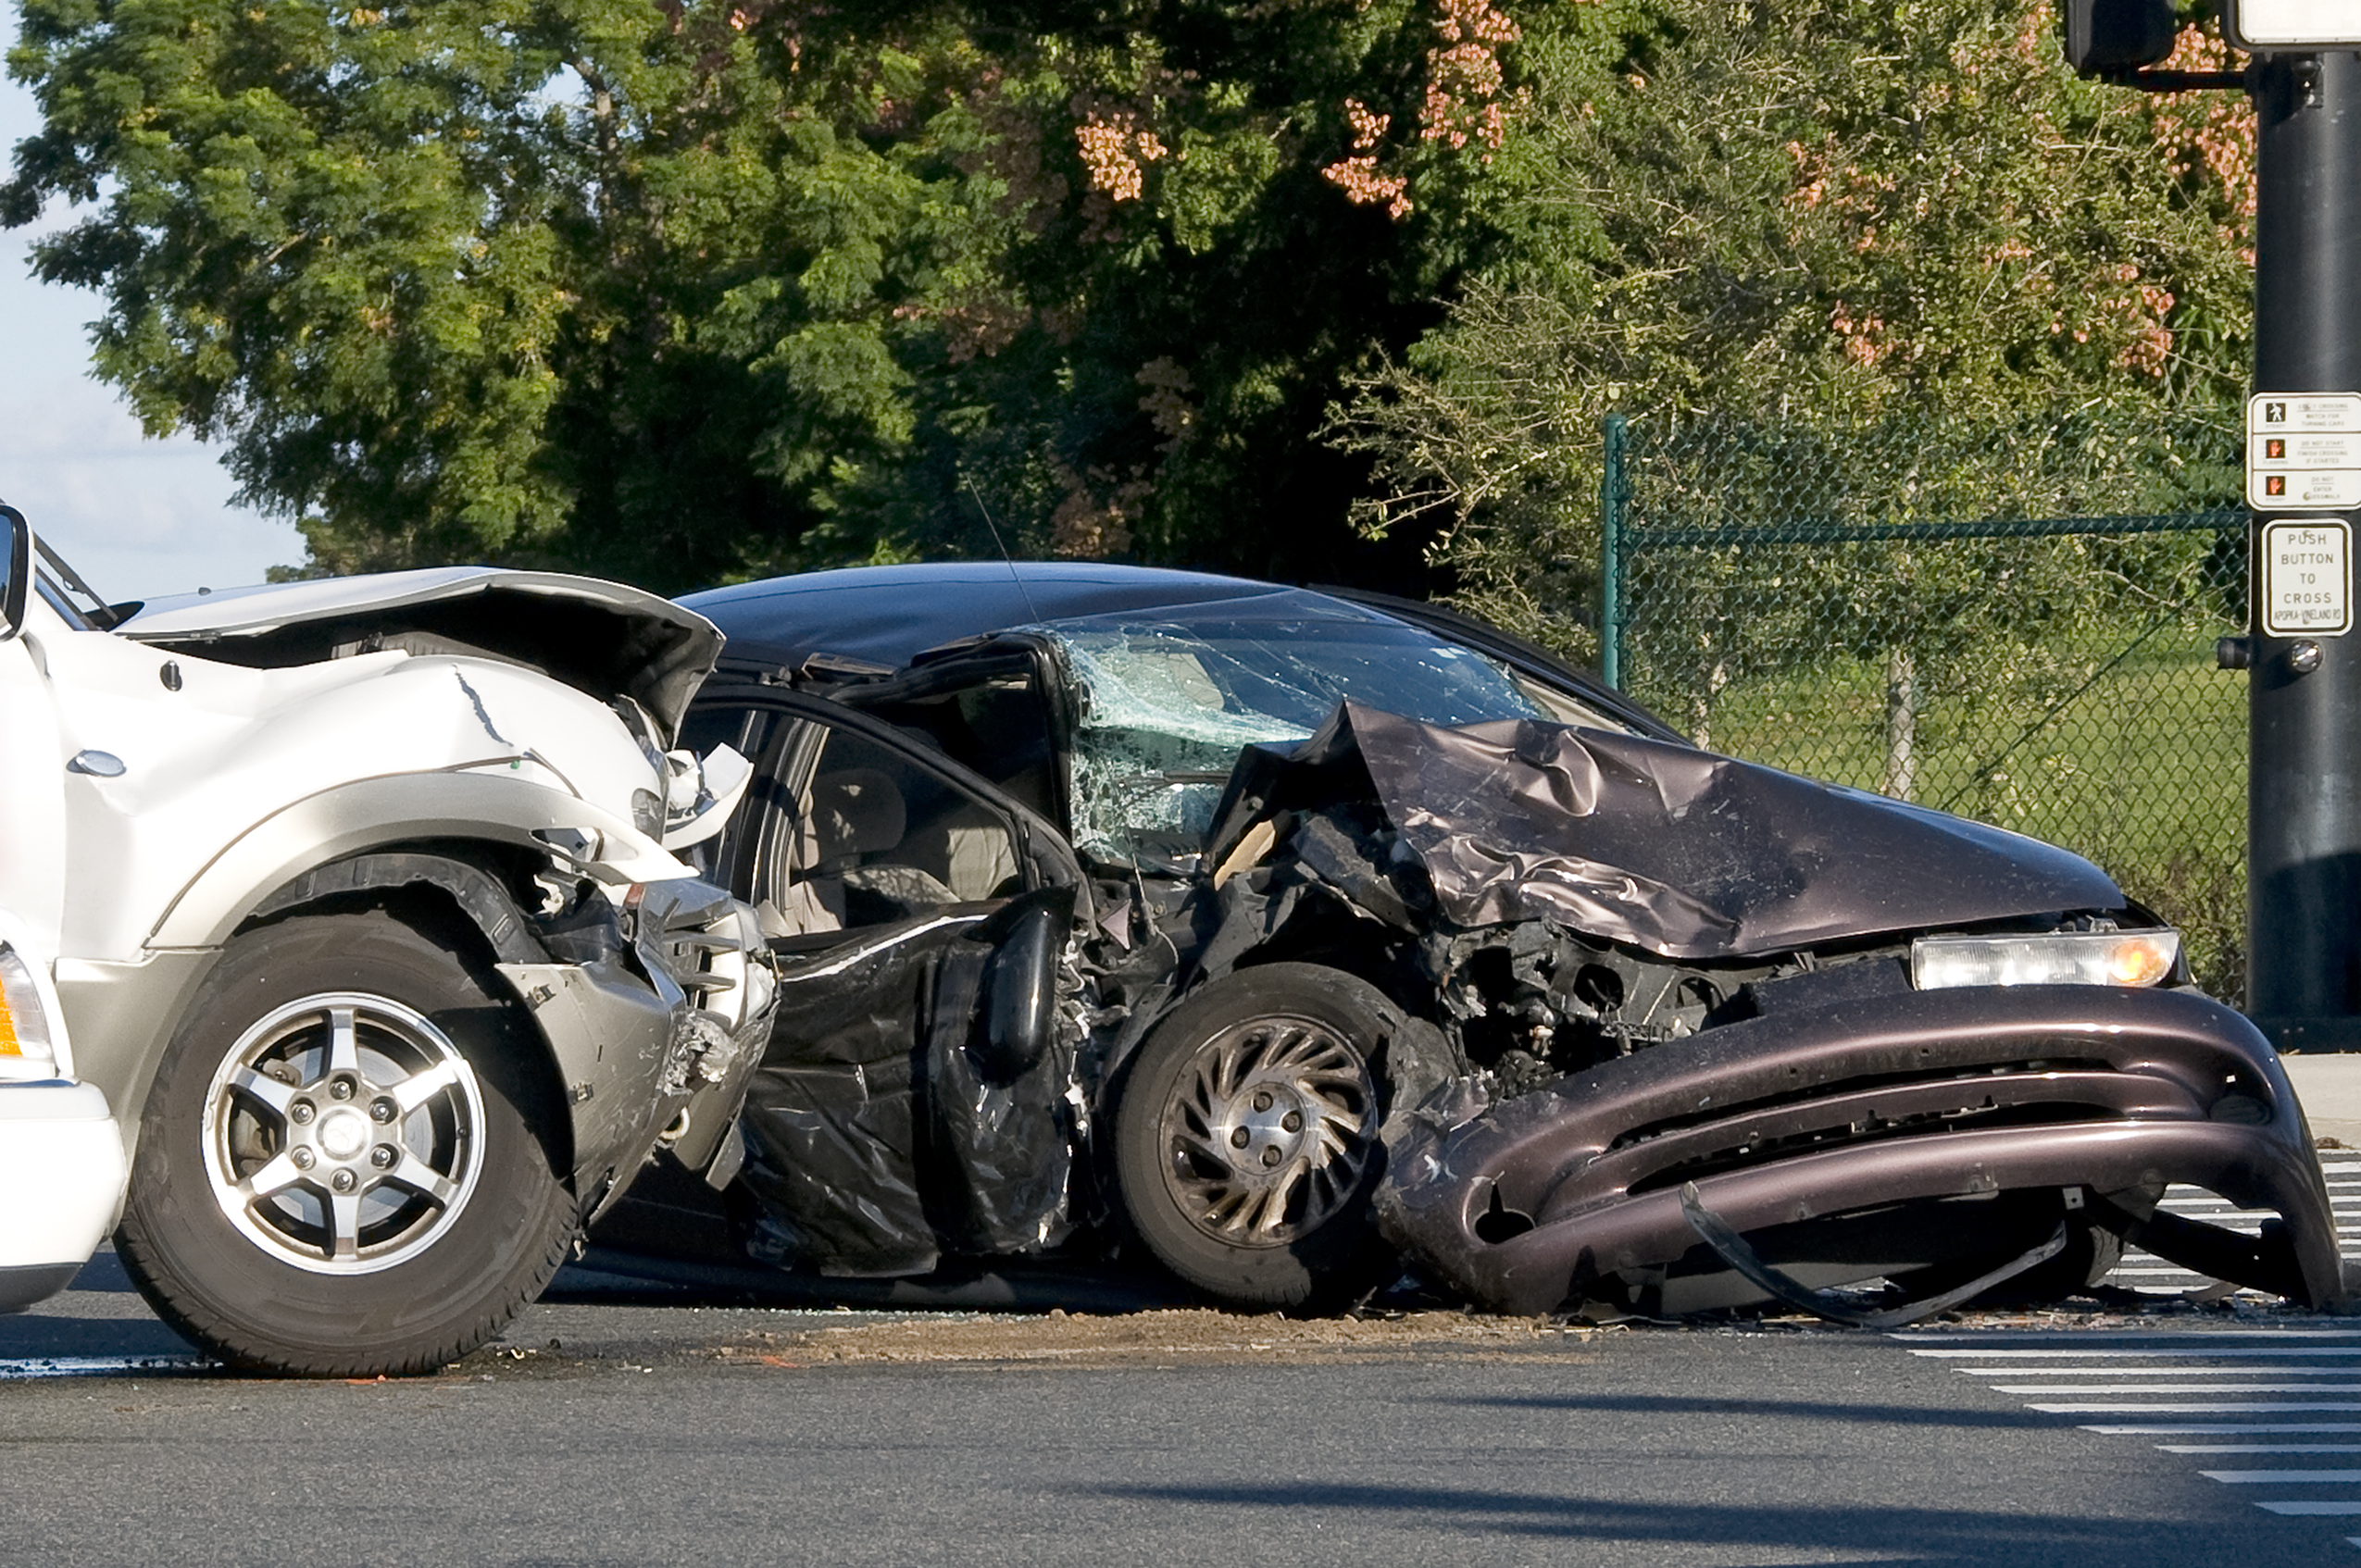 What happens when someone is killed in a car accident?